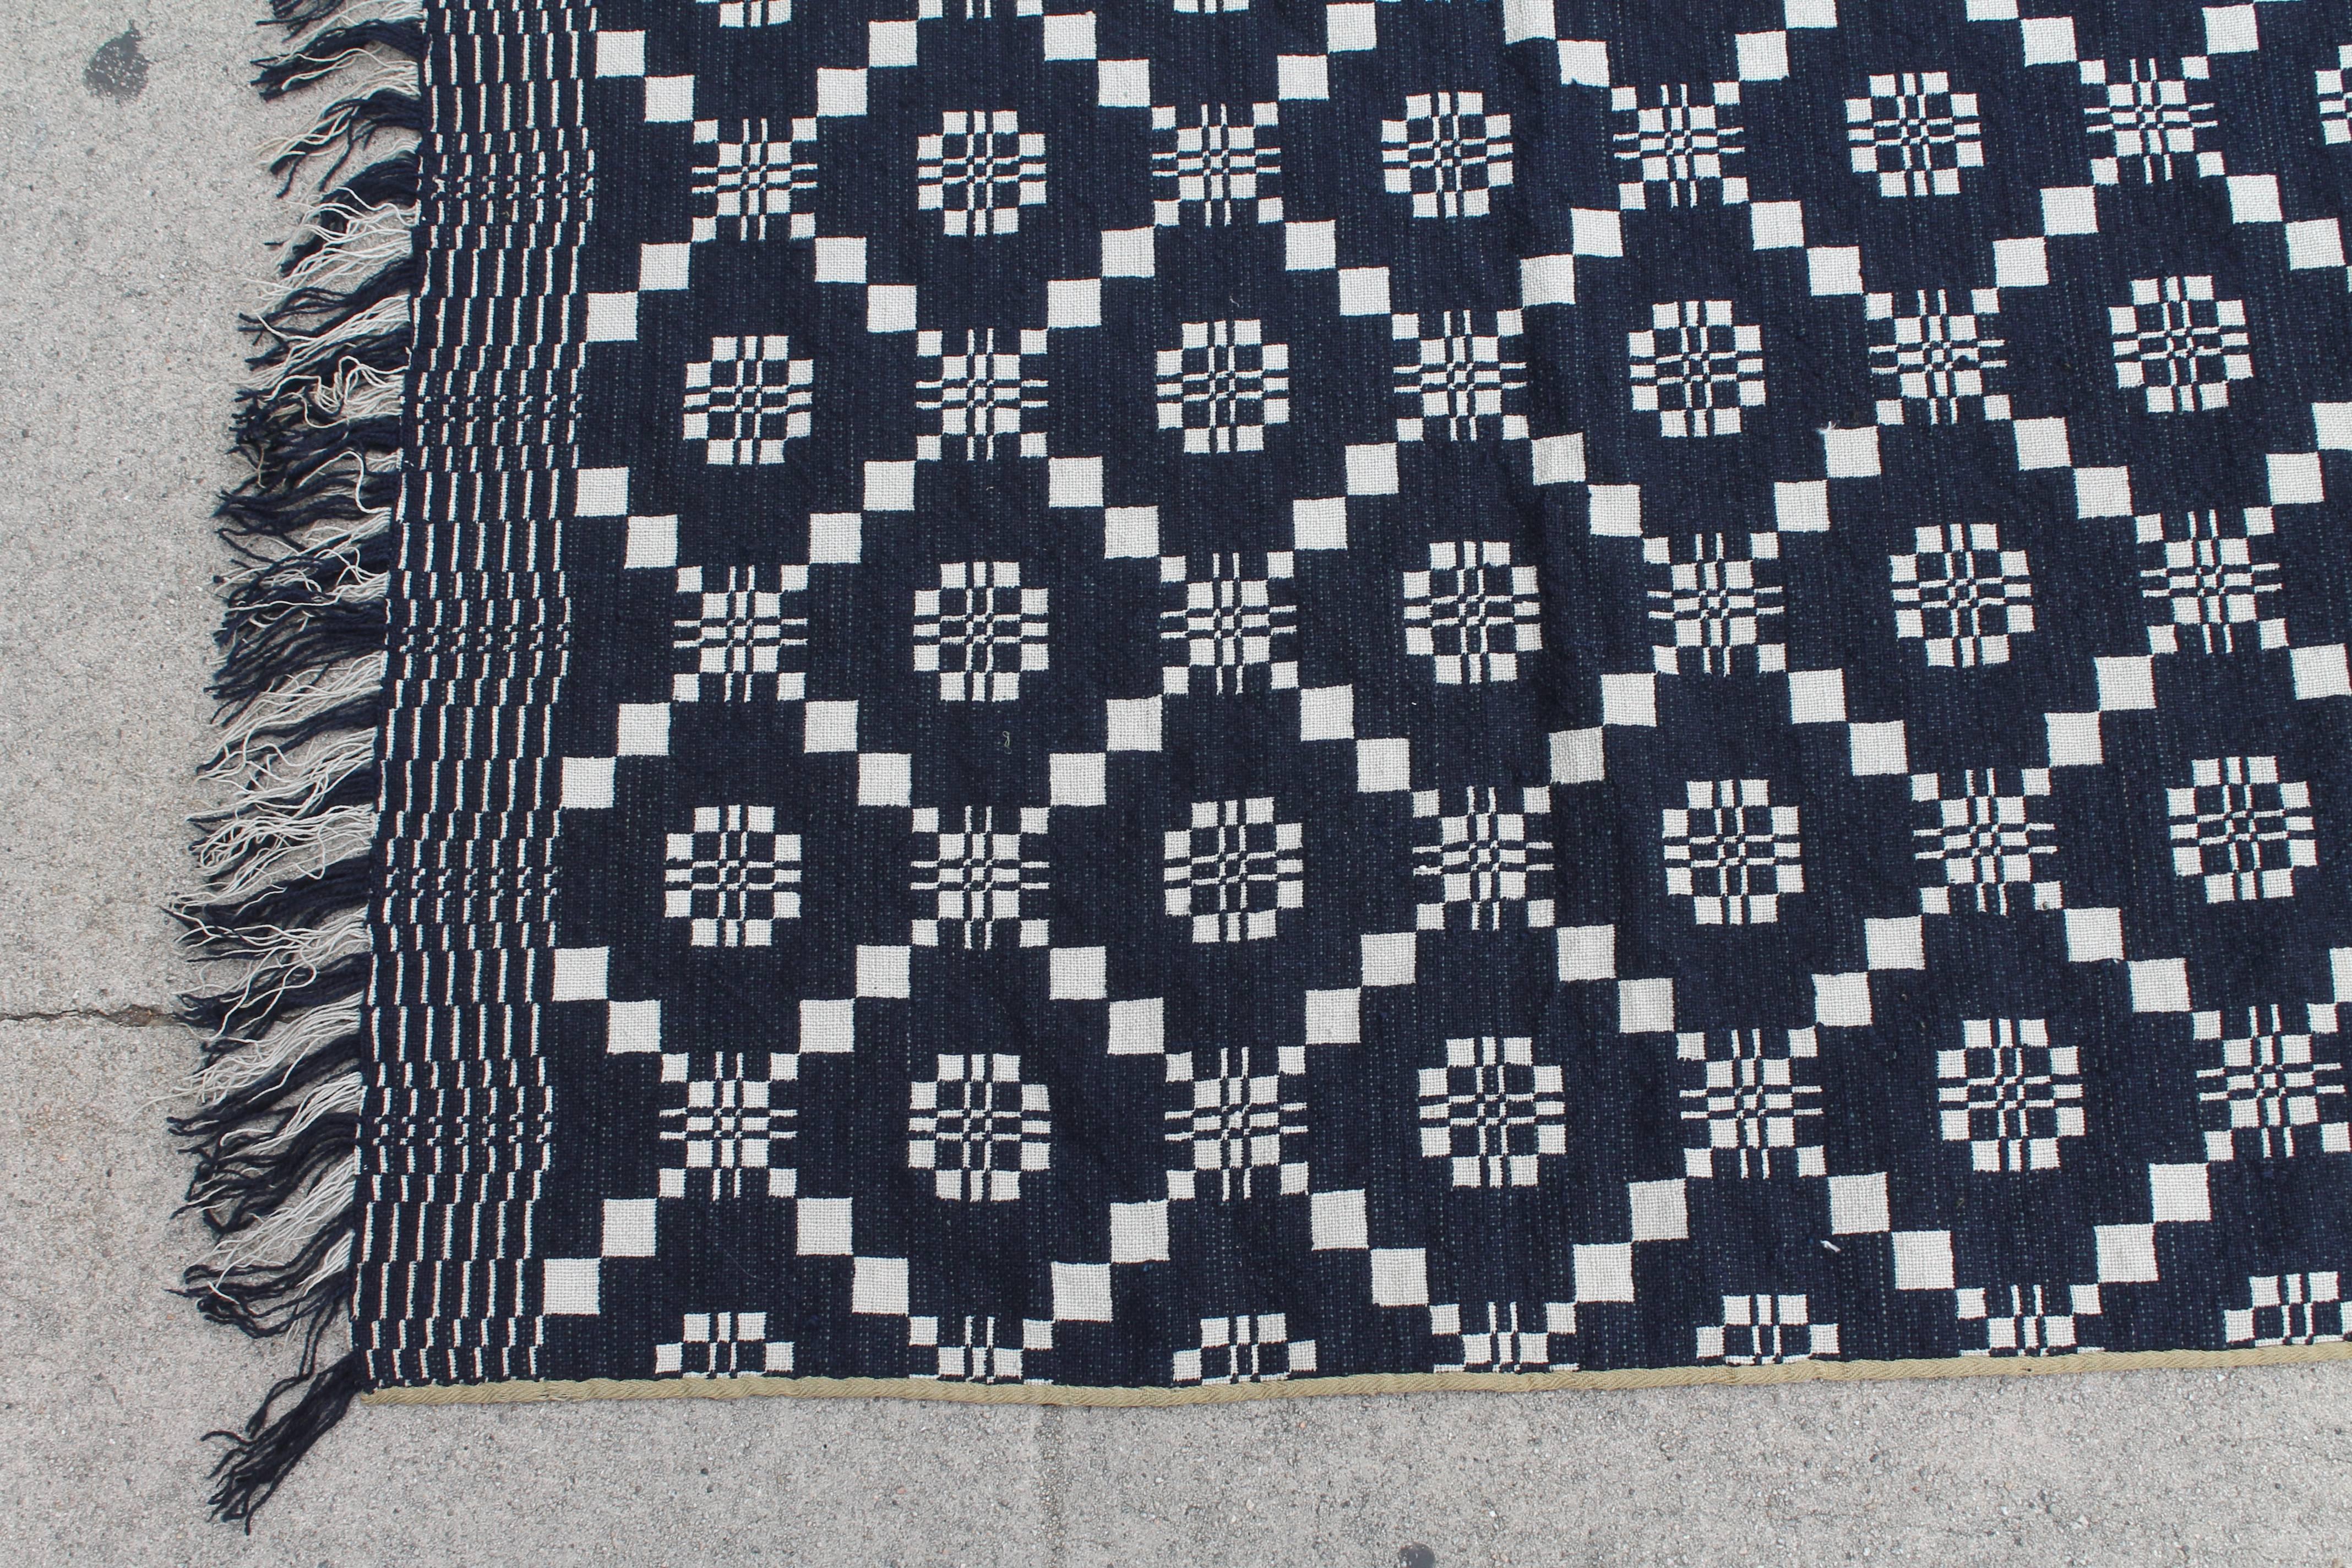 This pristine 18th century handwoven coverlet in dark indigo blue and white is in pristine condition and retains the original fringe. The reverse is white and blue same pattern. This fantastic coverlet has fringe on all three sides with a khaki